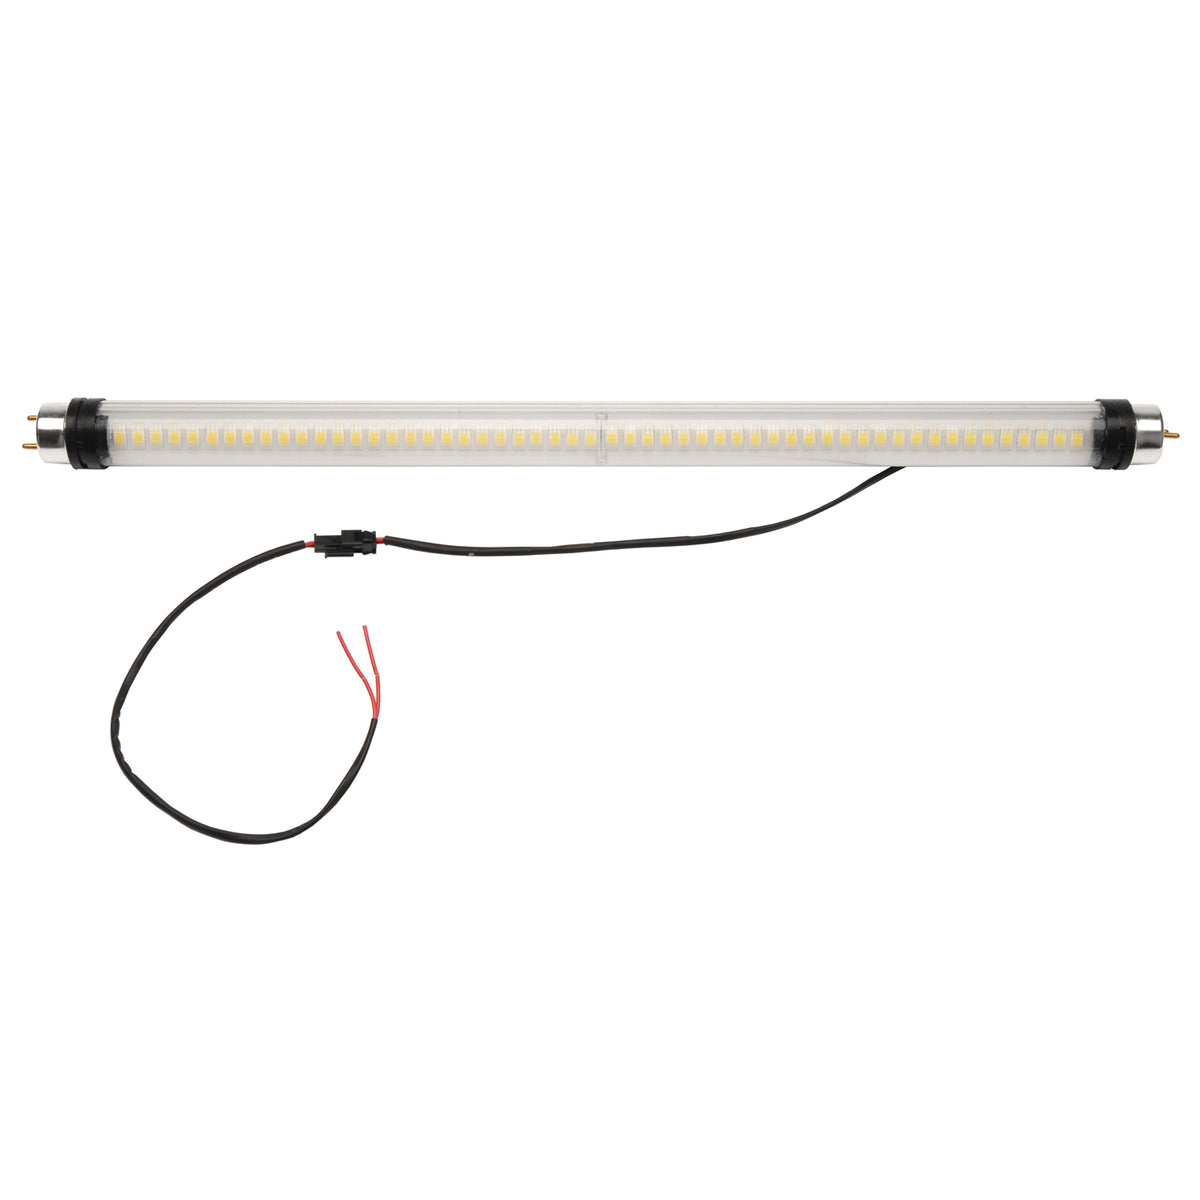 AP Products 016-T8-18 Star Lights LED Replacement for Fluorescent Tube - 18"